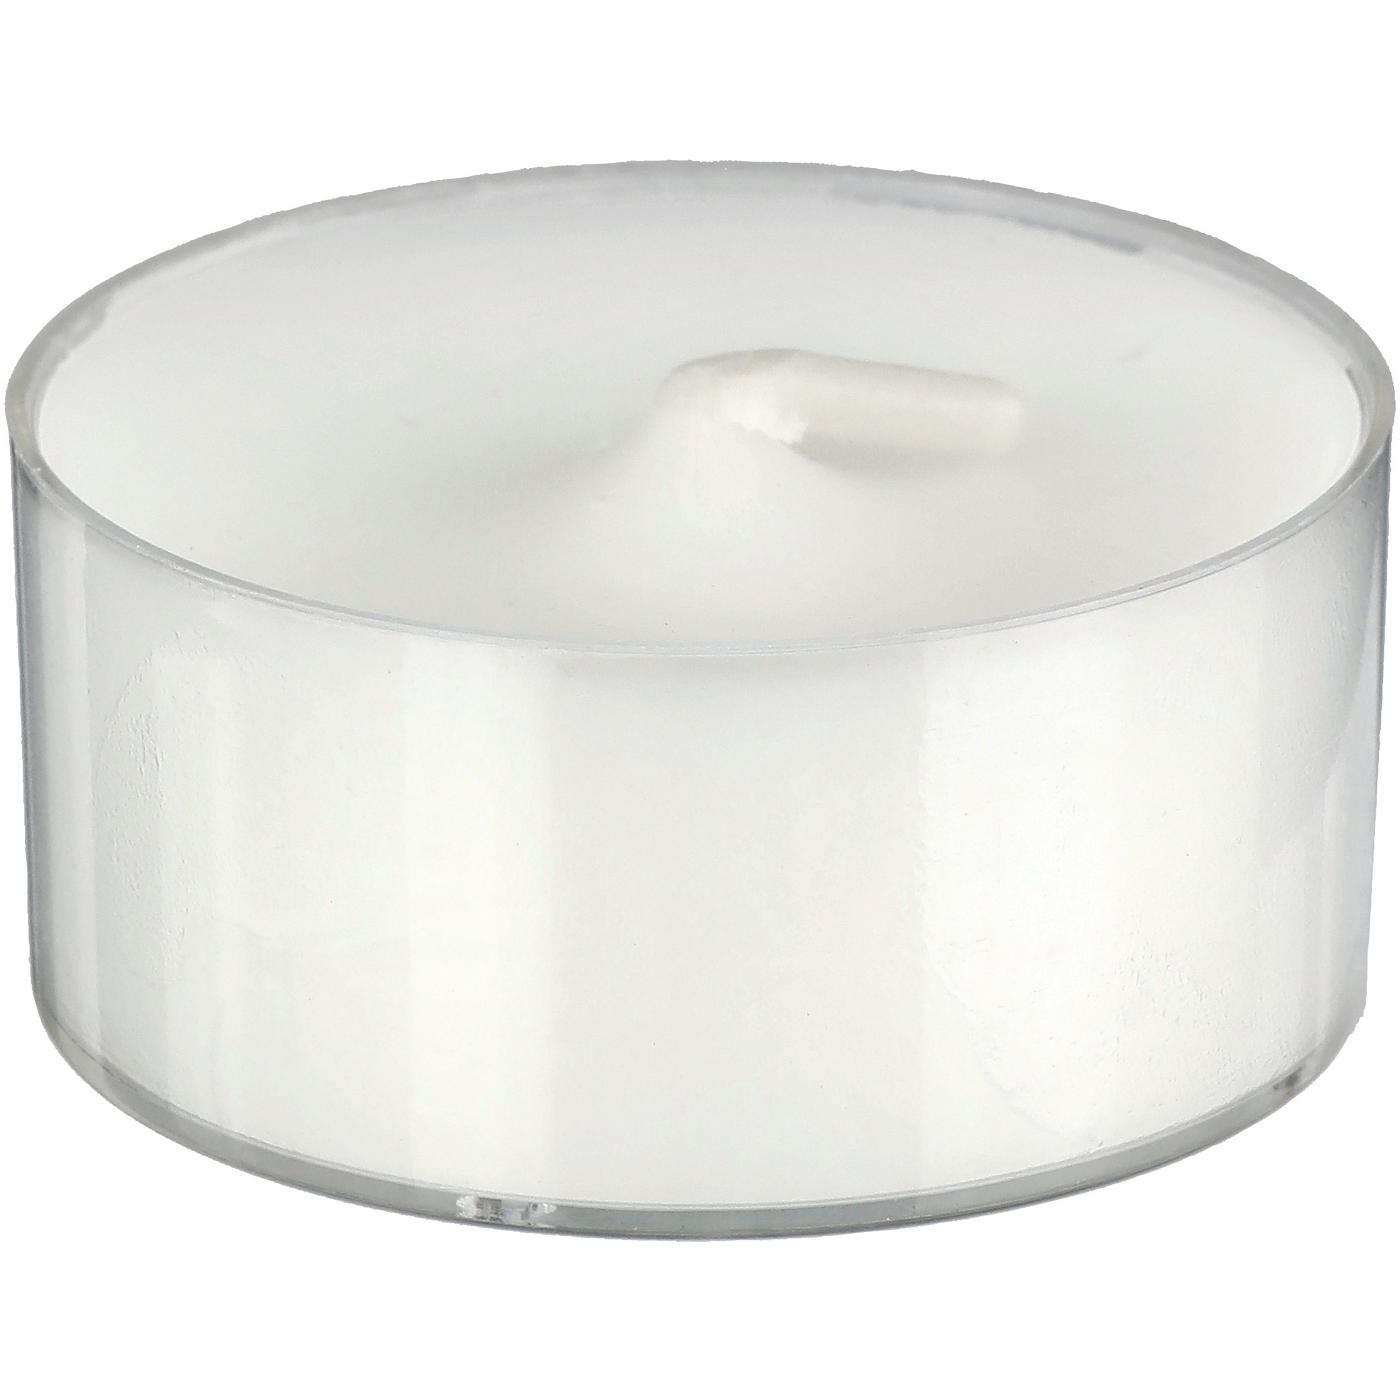 Haven + Key Gardenia Scented Tealights; image 2 of 2